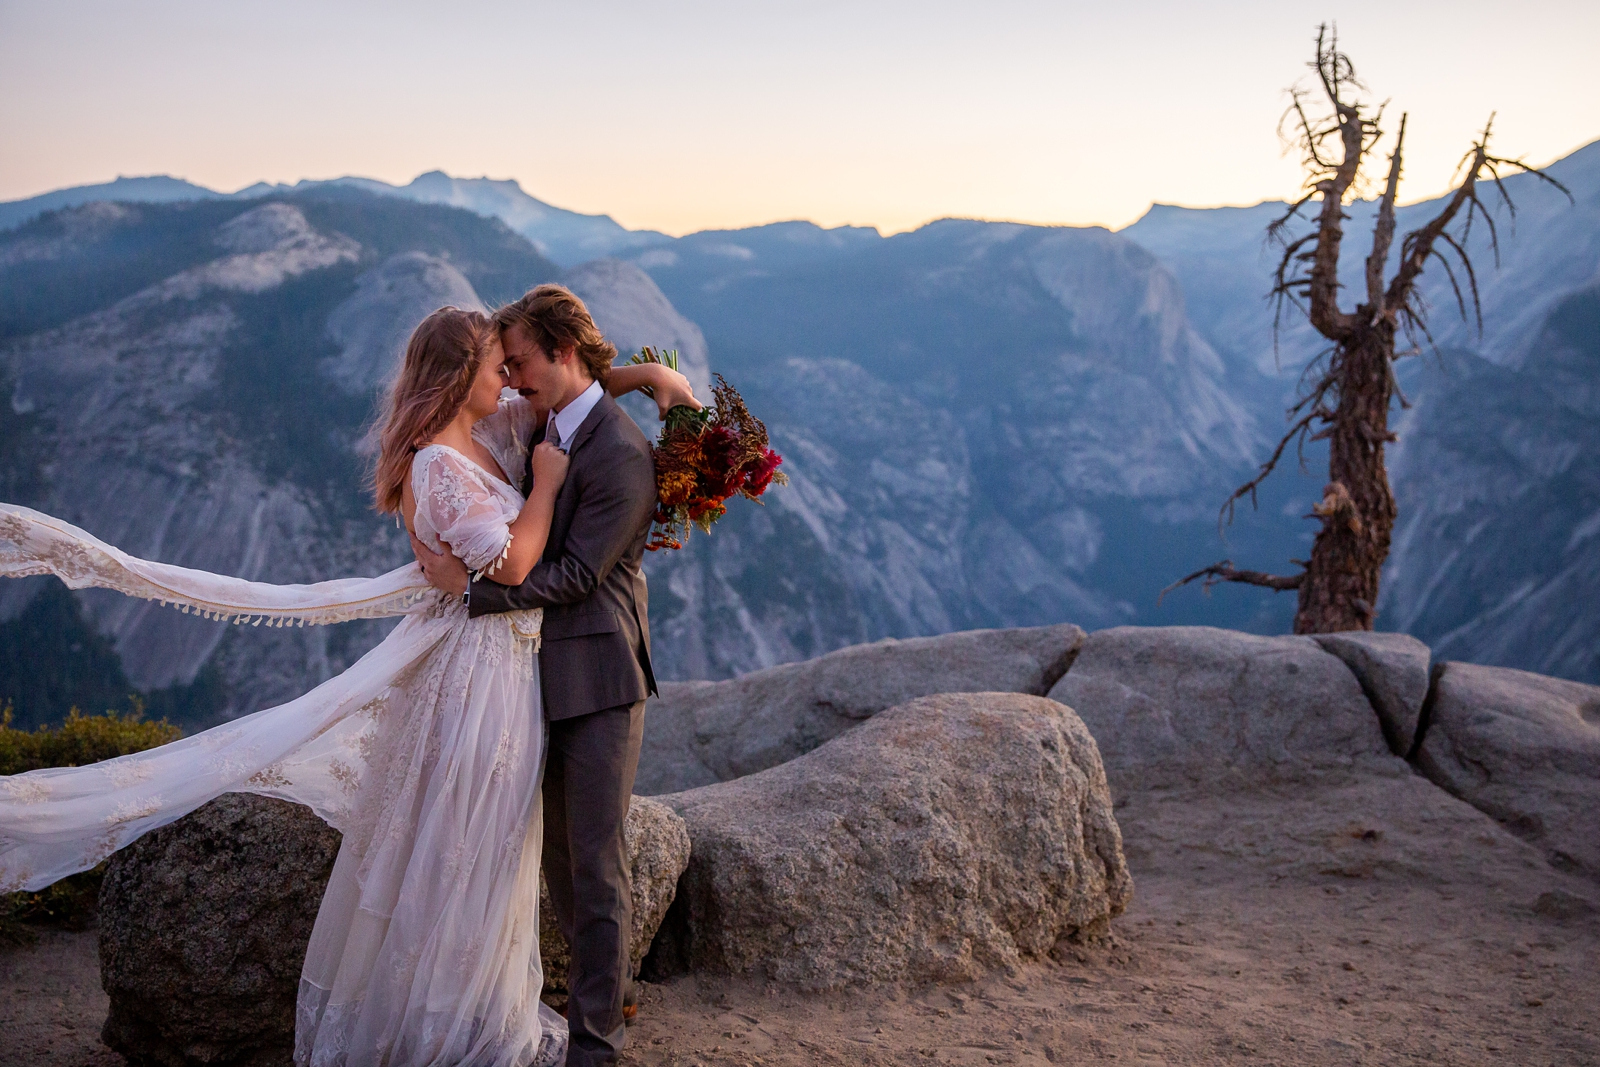 An eloping couple at sunrise in Yosemite.